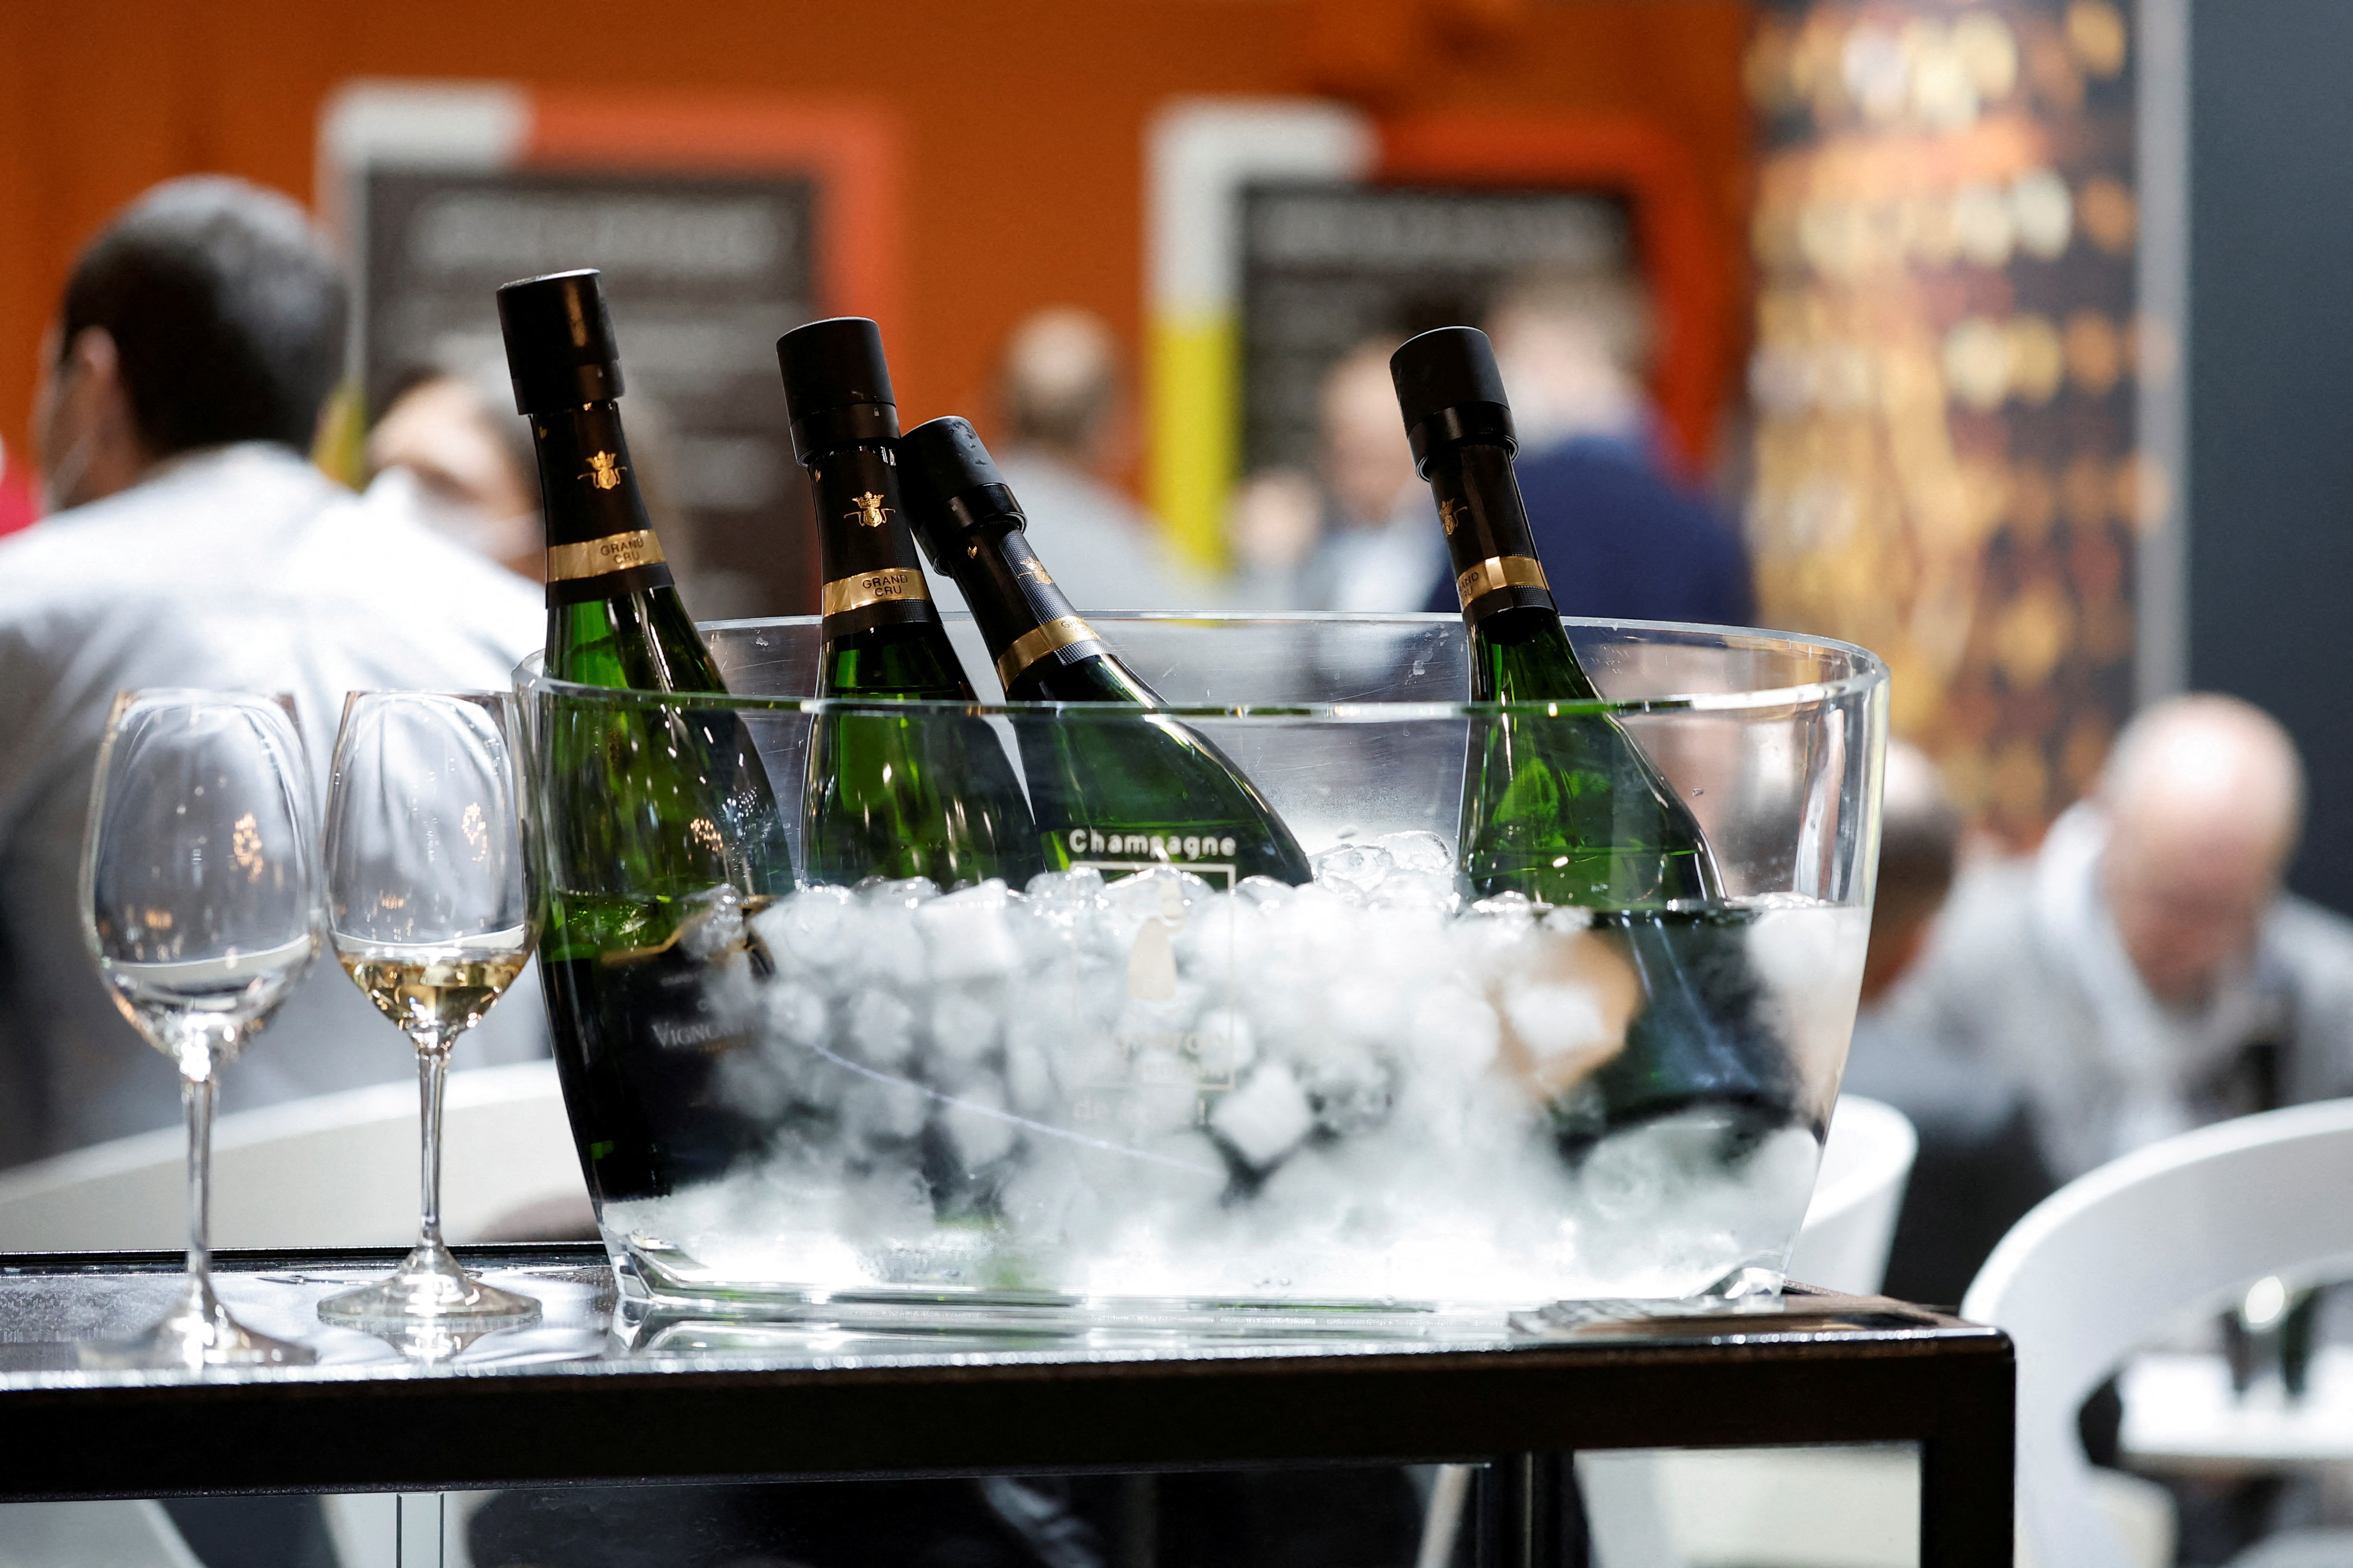 Food Industry News: LVMH'S WINE & SPIRITS DIVISION SEES DECLINE OF 4%